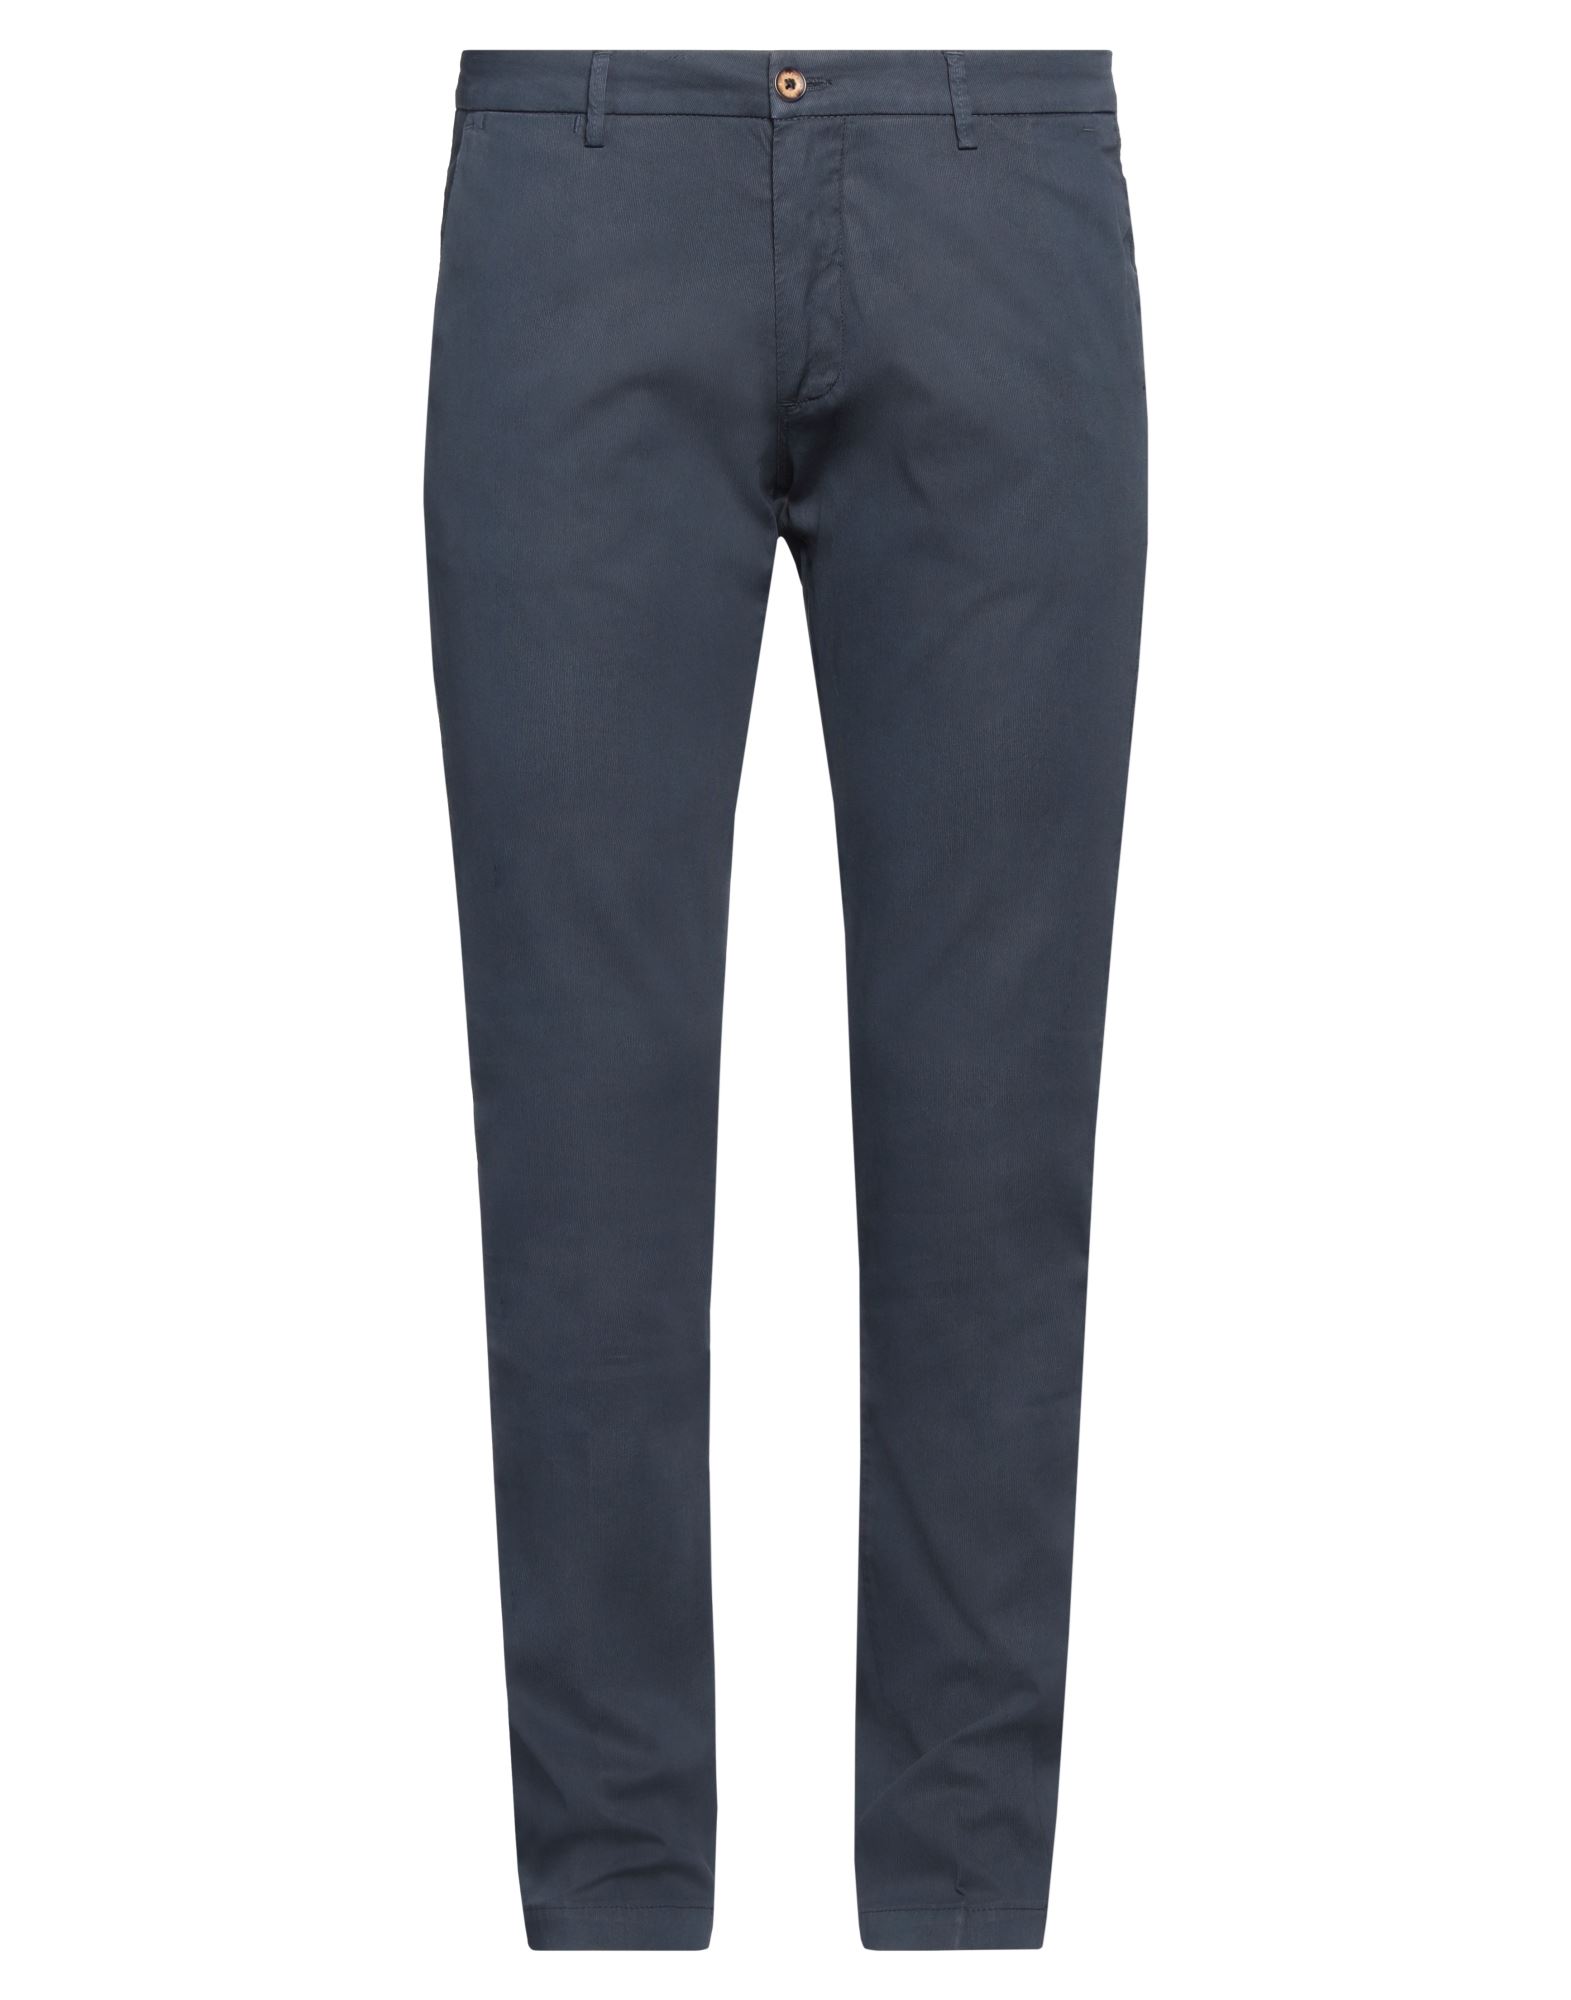 Our Fly Man Pants Midnight Blue Size 38 Cotton, Elastane